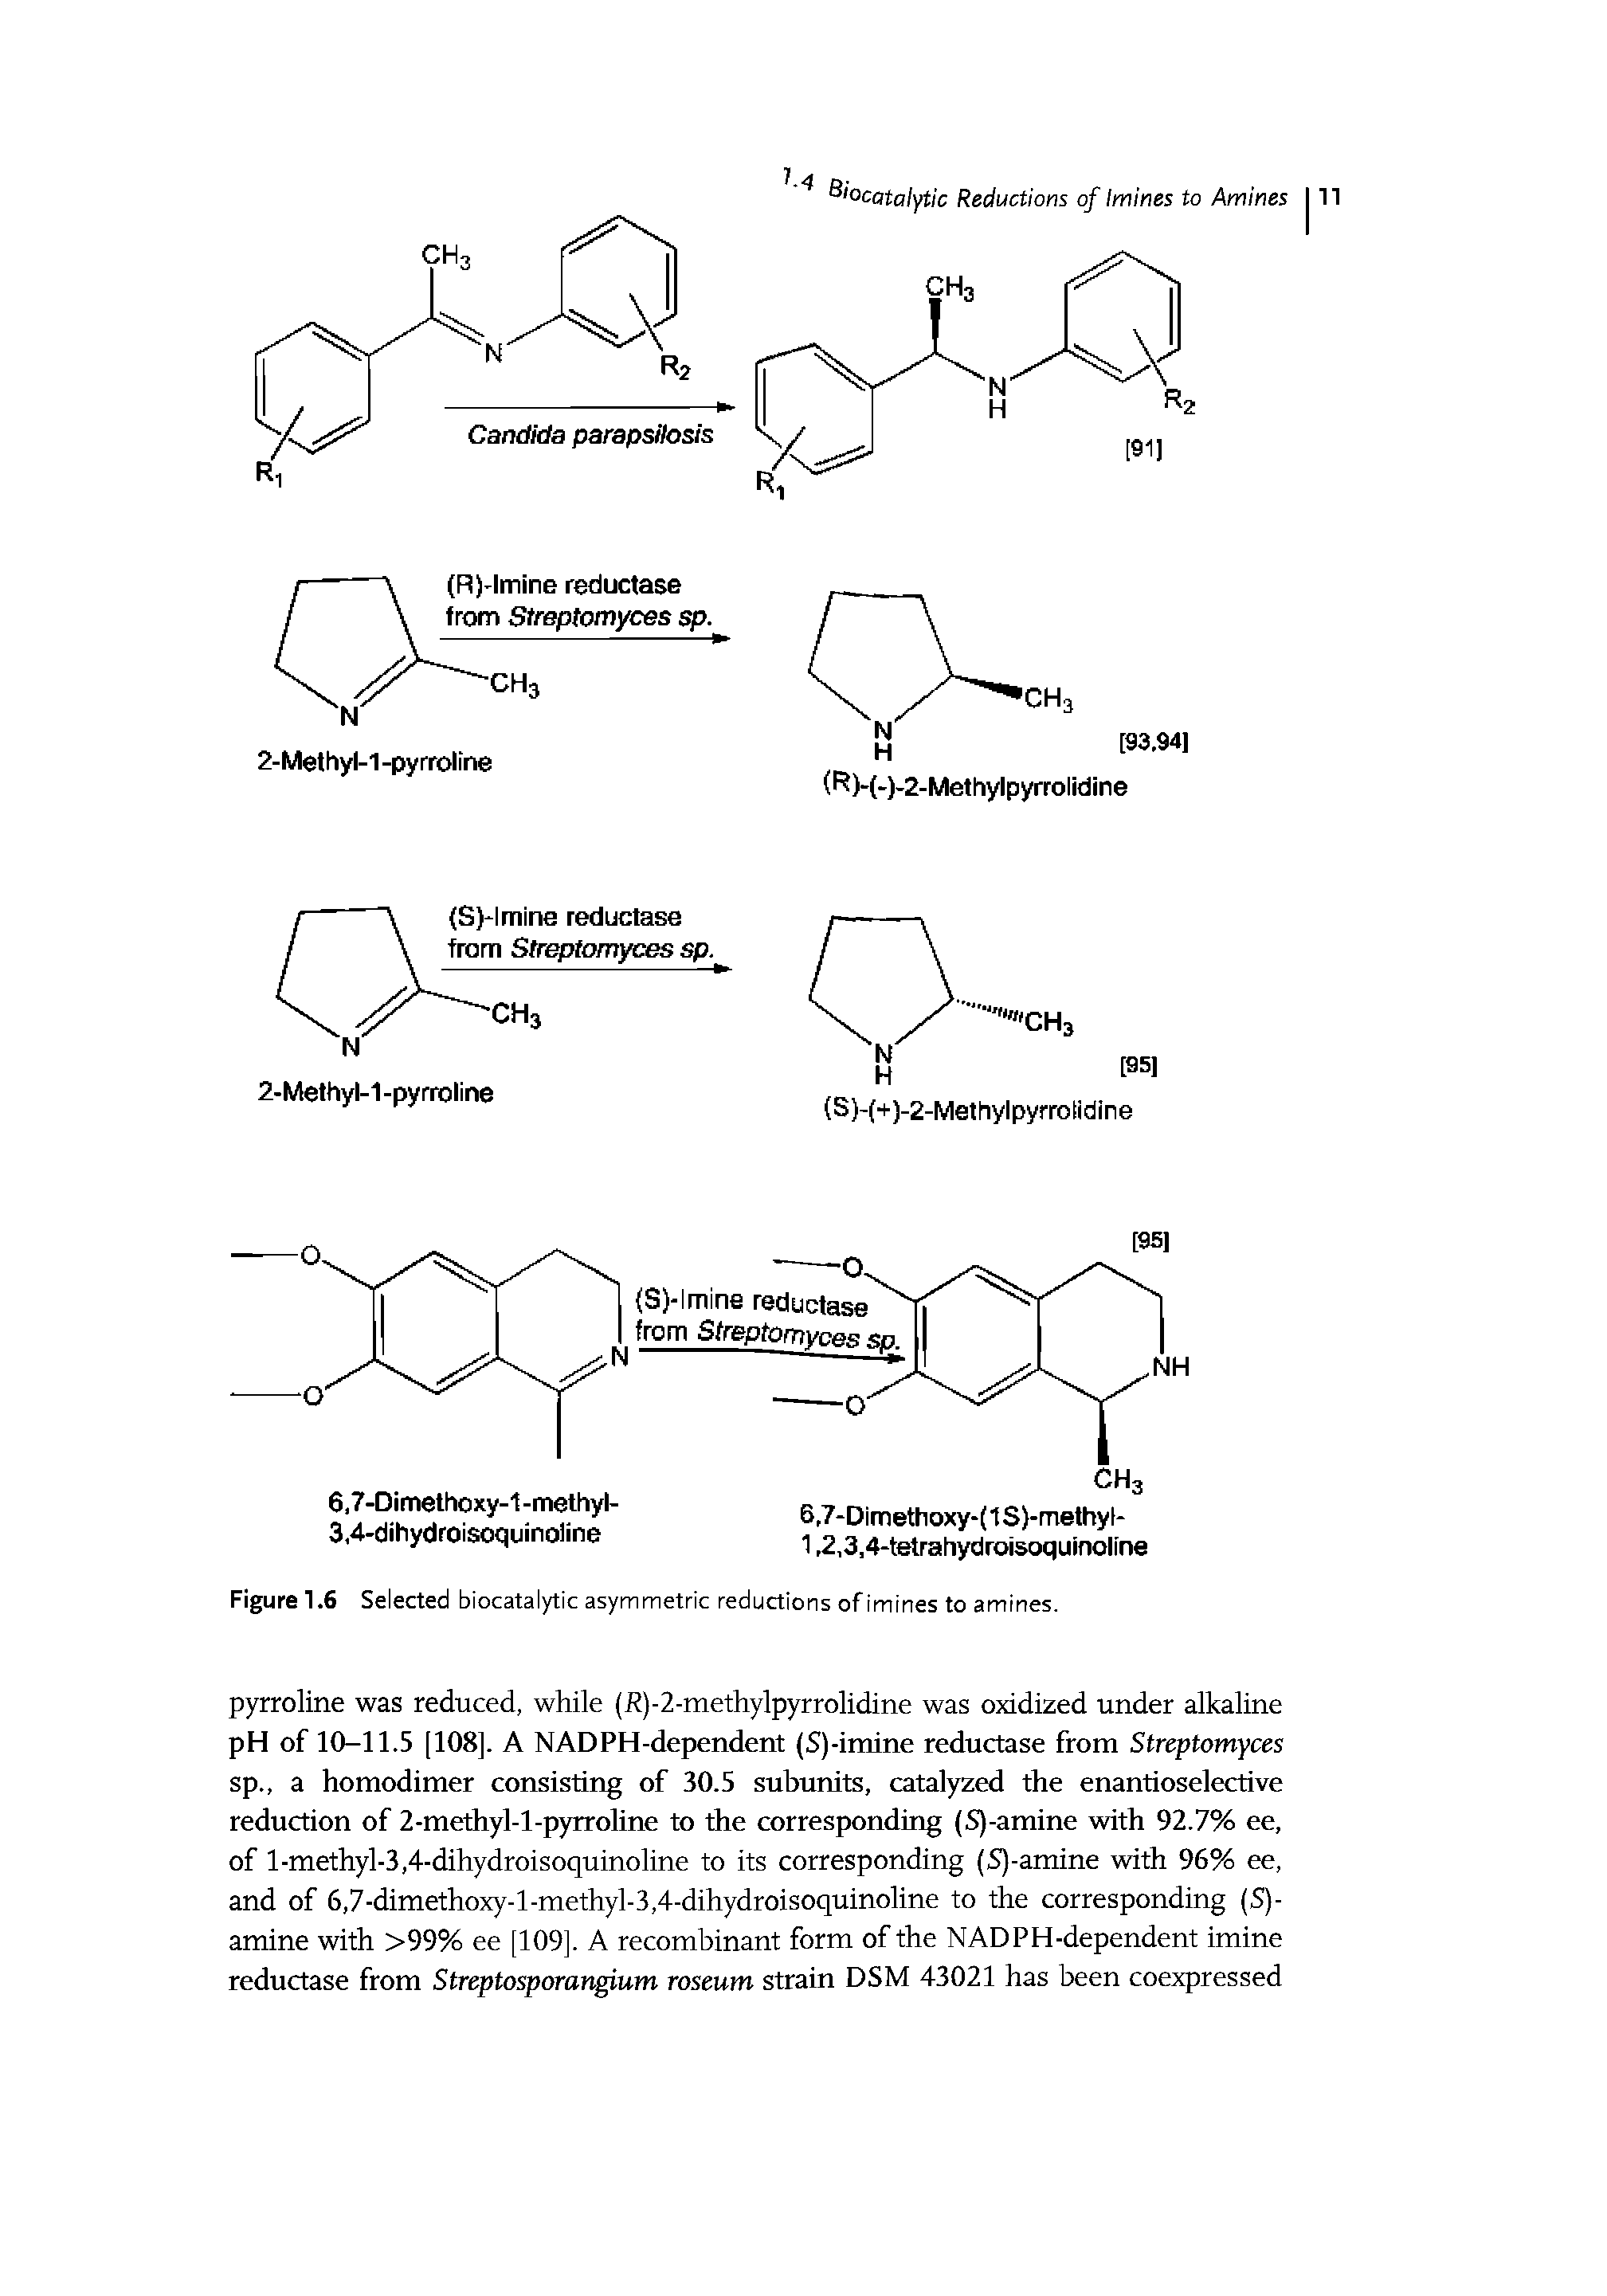 Figure 1.6 Selected biocatalytic asymmetric reductions of imines to amines.